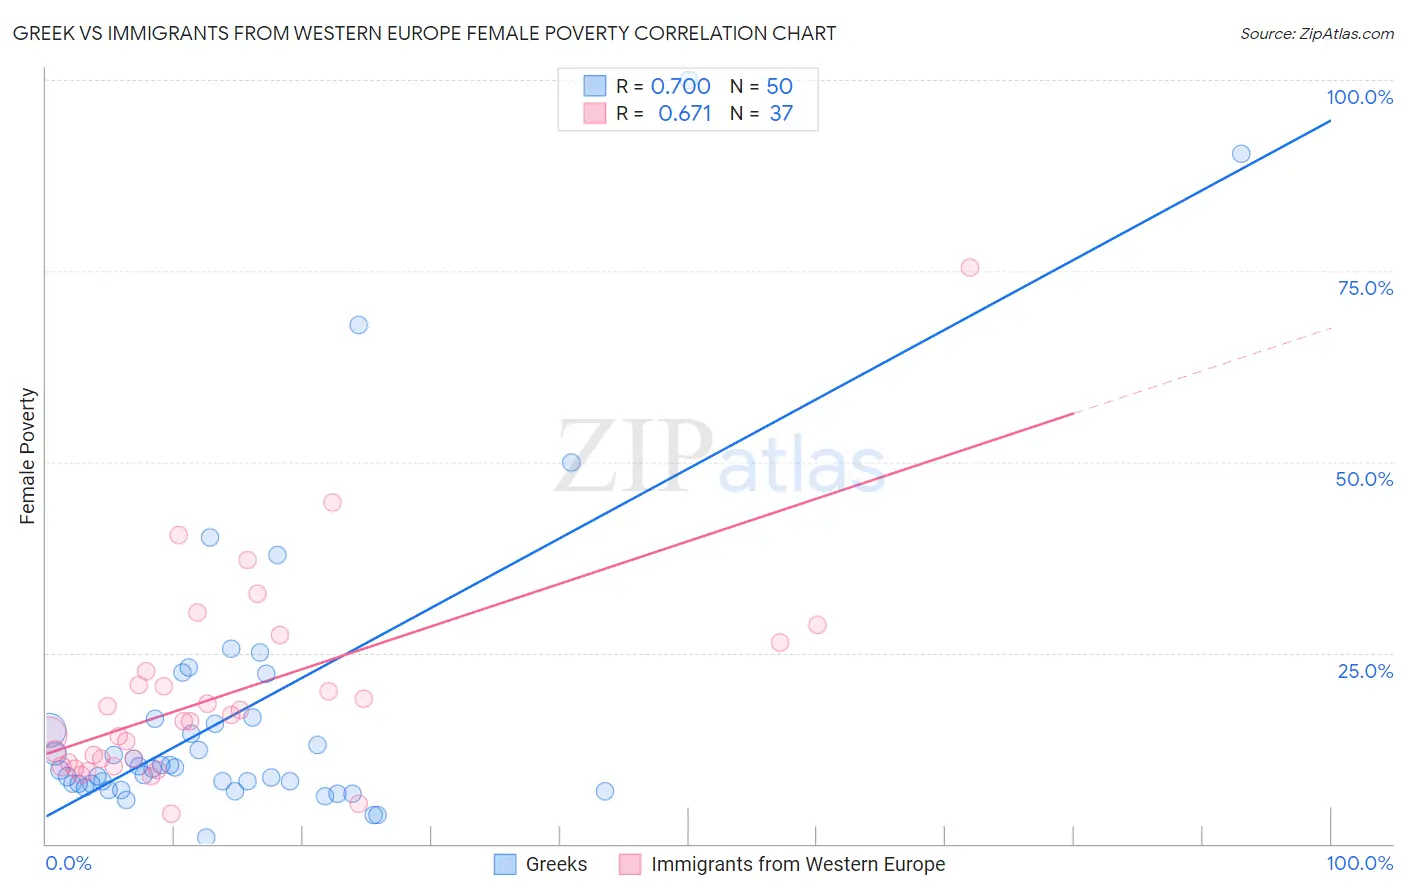 Greek vs Immigrants from Western Europe Female Poverty